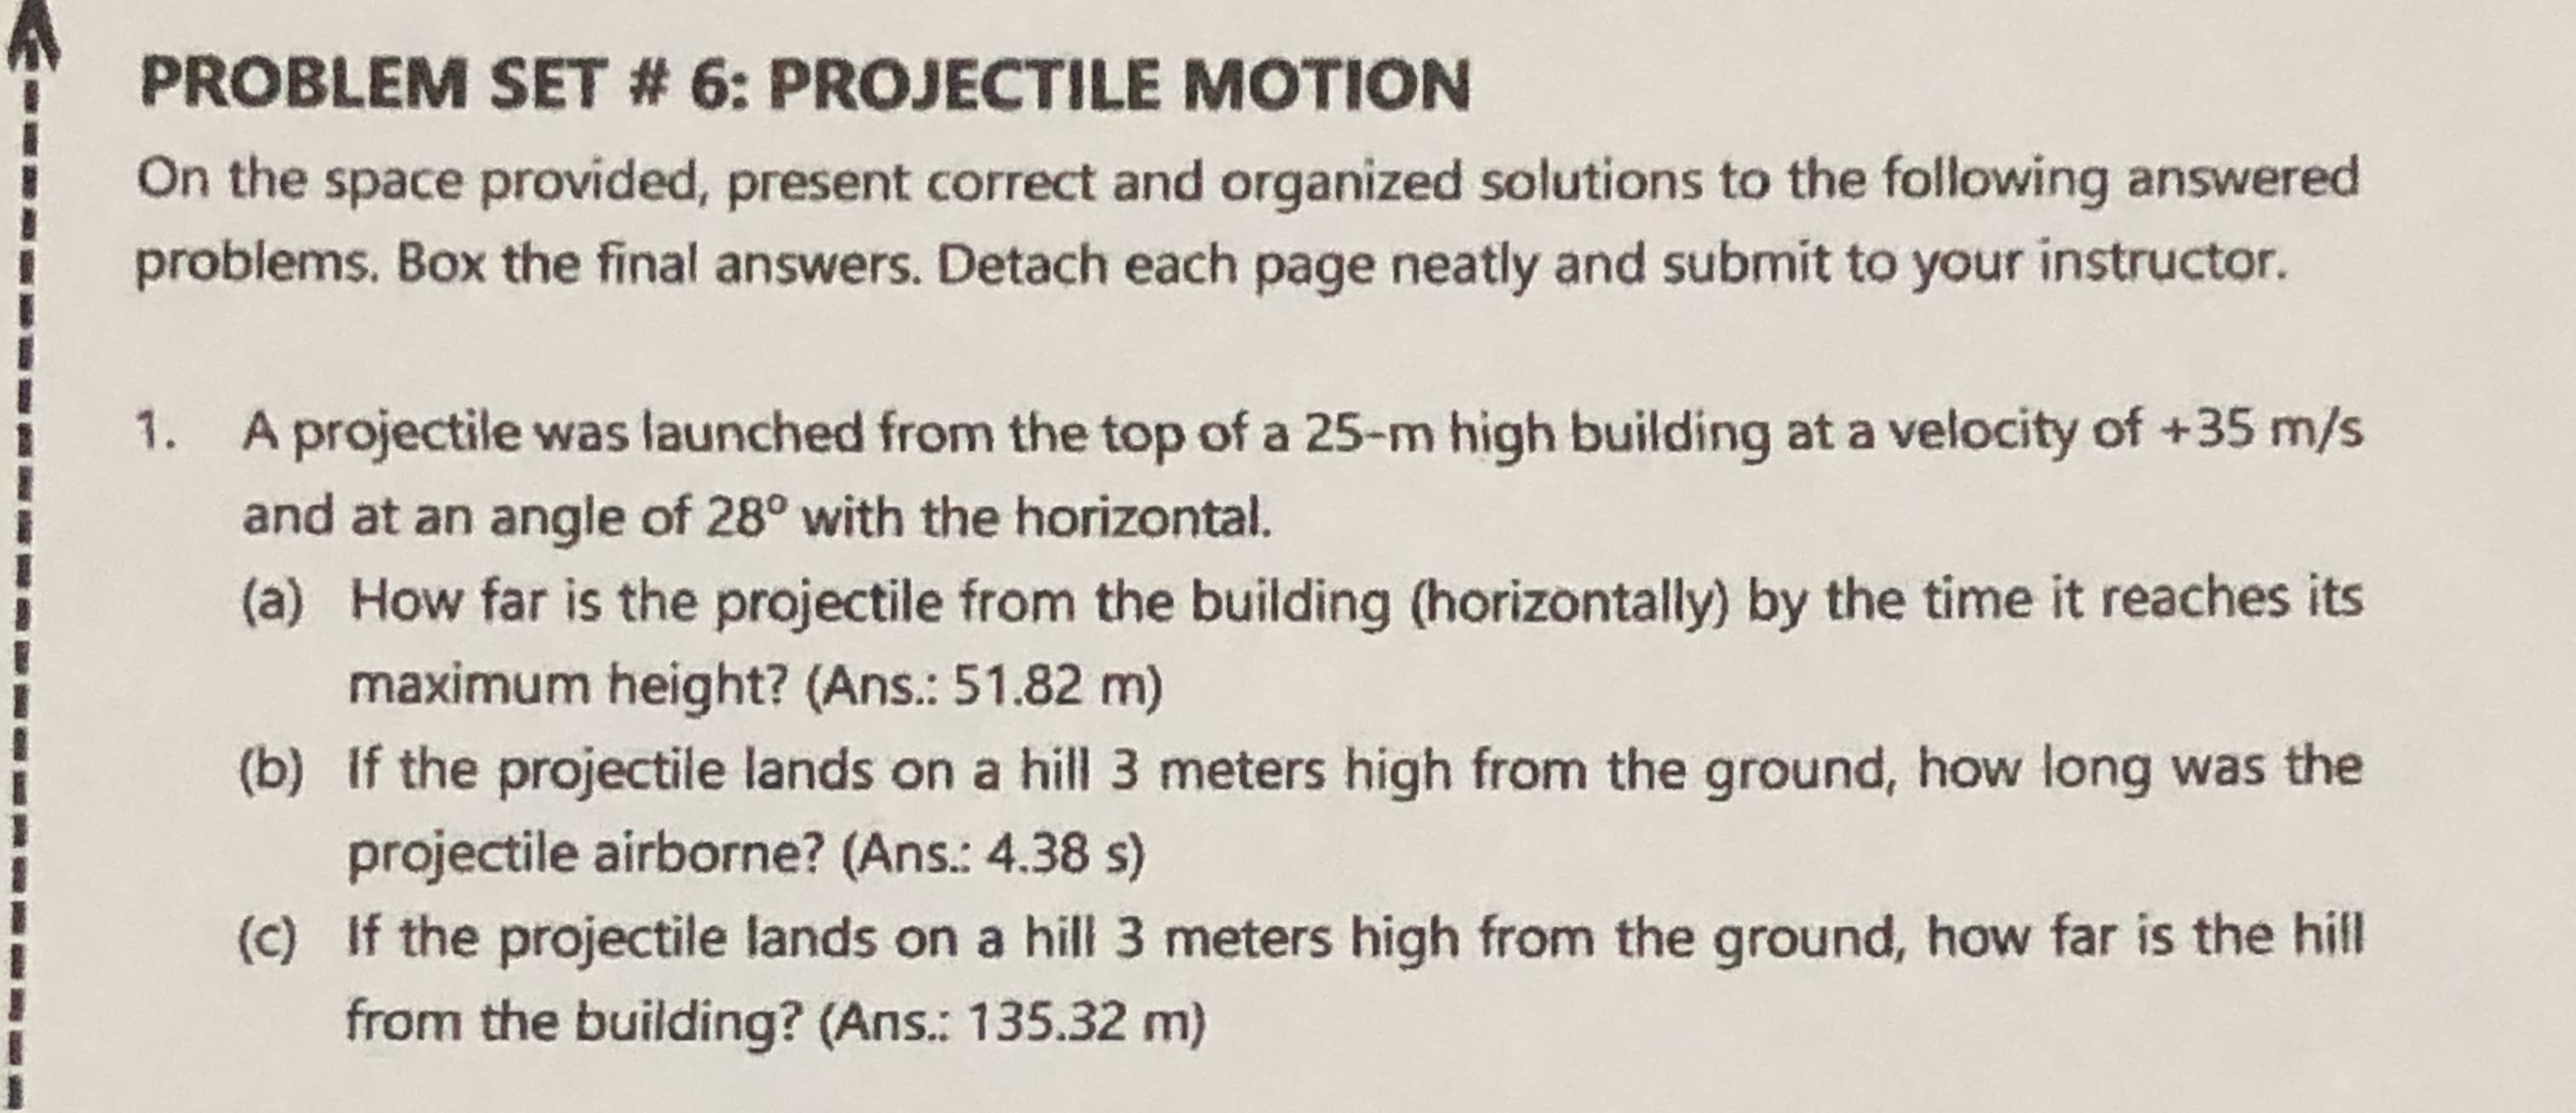 1. A projectile was launched from the top of a 25-m high building at a velocity of +35 m/s
and at an angle of 28° with the horizontal.
(a) How far is the projectile from the building (horizontally) by the time it reaches its
maximum height? (Ans.: 51.82 m)
(b) If the projectile lands on a hill 3 meters high from the ground, how long was the
projectile airborne? (Ans.: 4.38 s)
(c) If the projectile lands on a hill 3 meters high from the ground, how far is the hill
from the building? (Ans.: 135.32 m)
